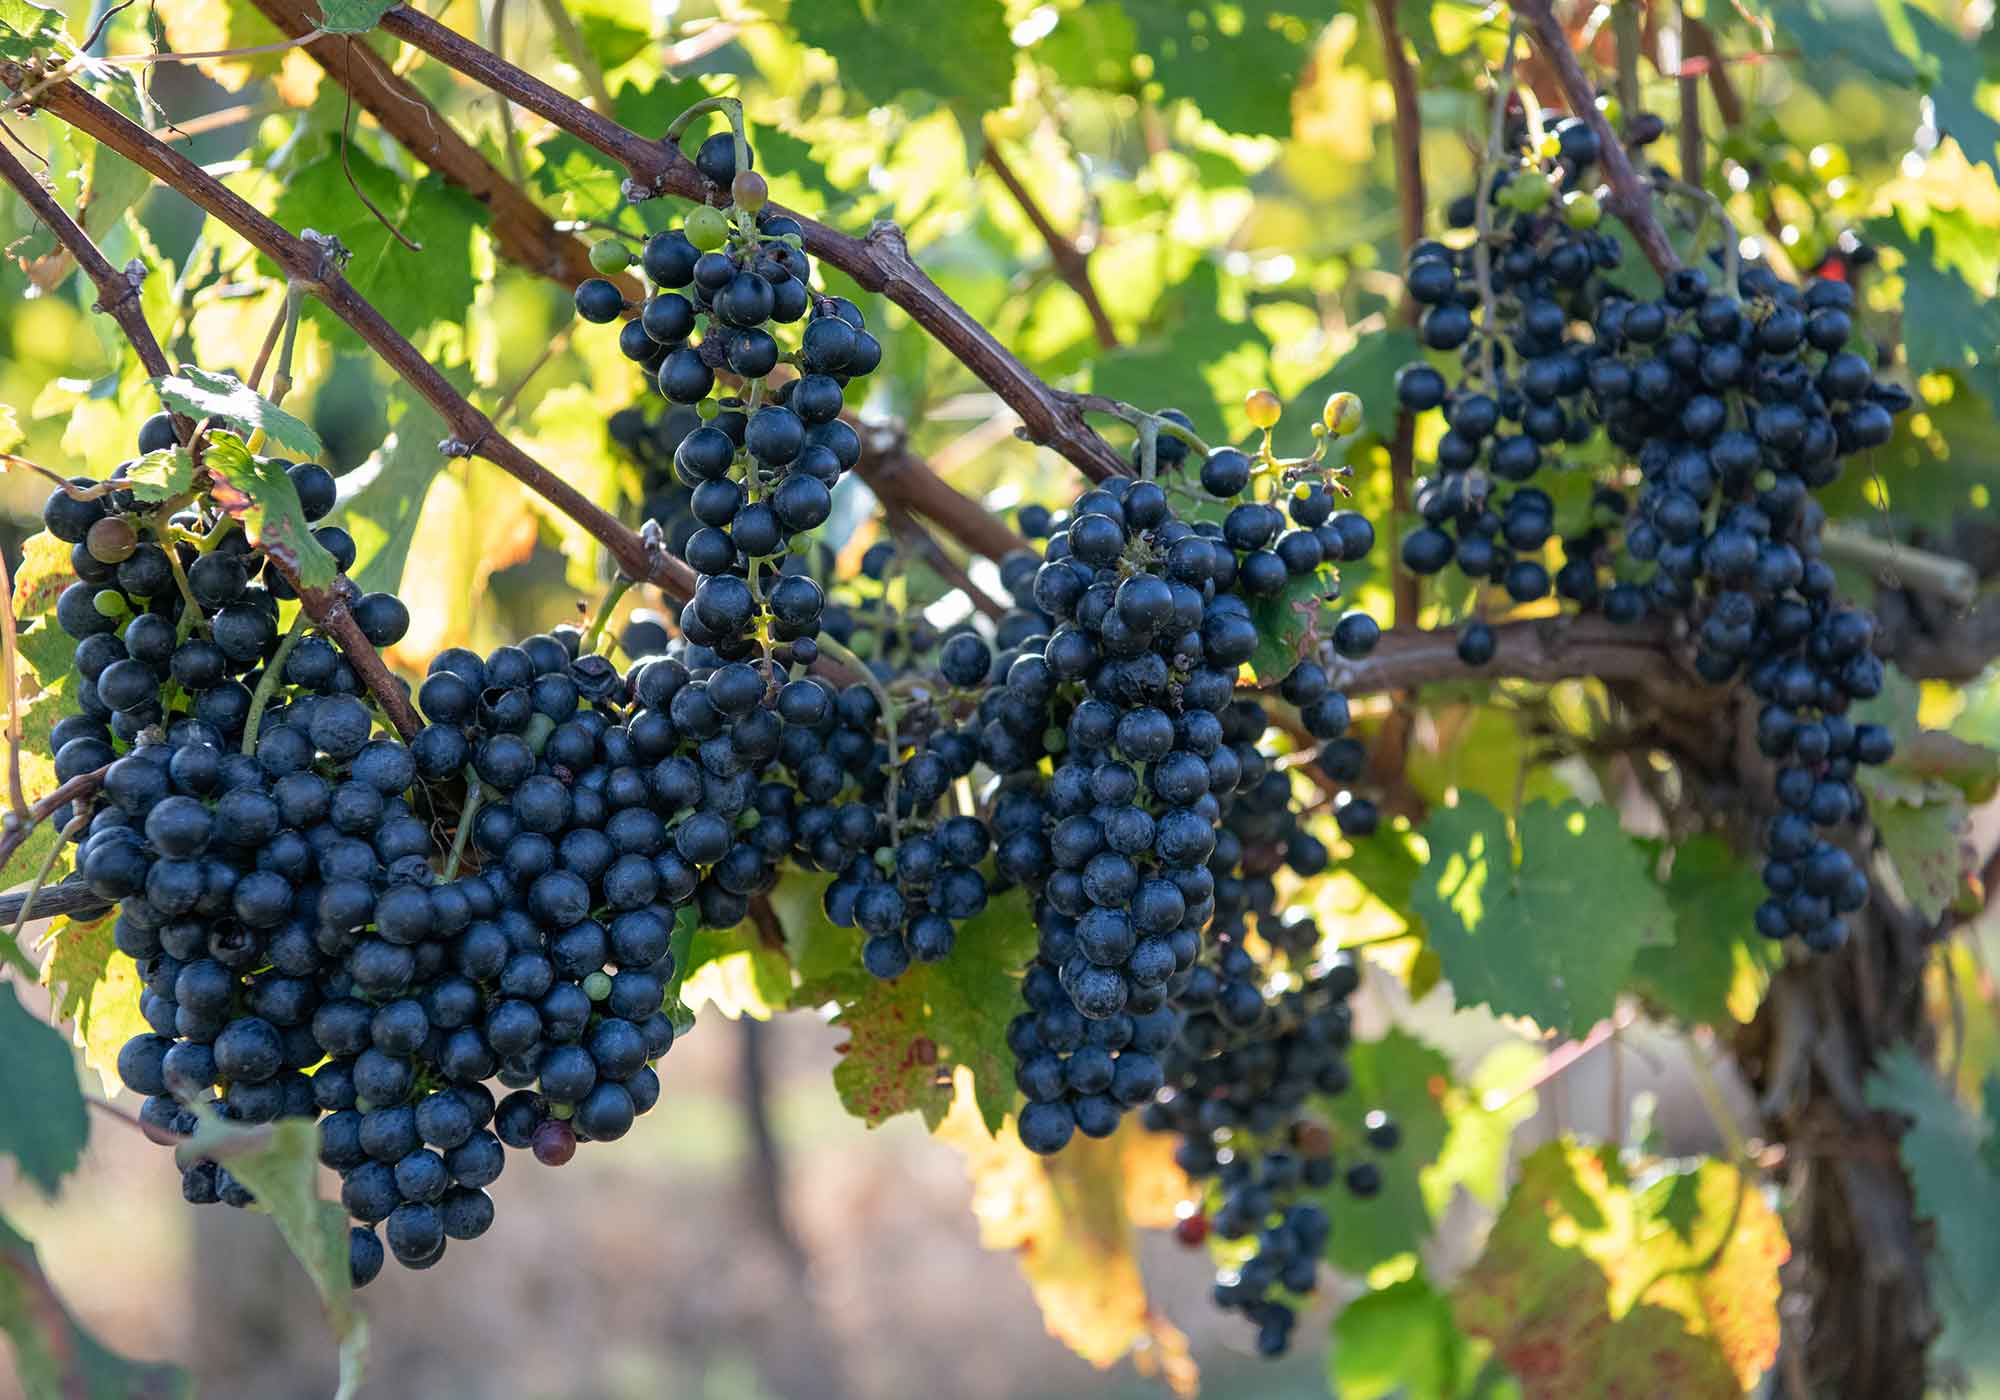 Large bunches of ripe wine grapes ready for harvest. The petite verdot blocks are ready for harvest at Southwest Mountains Vineyards.